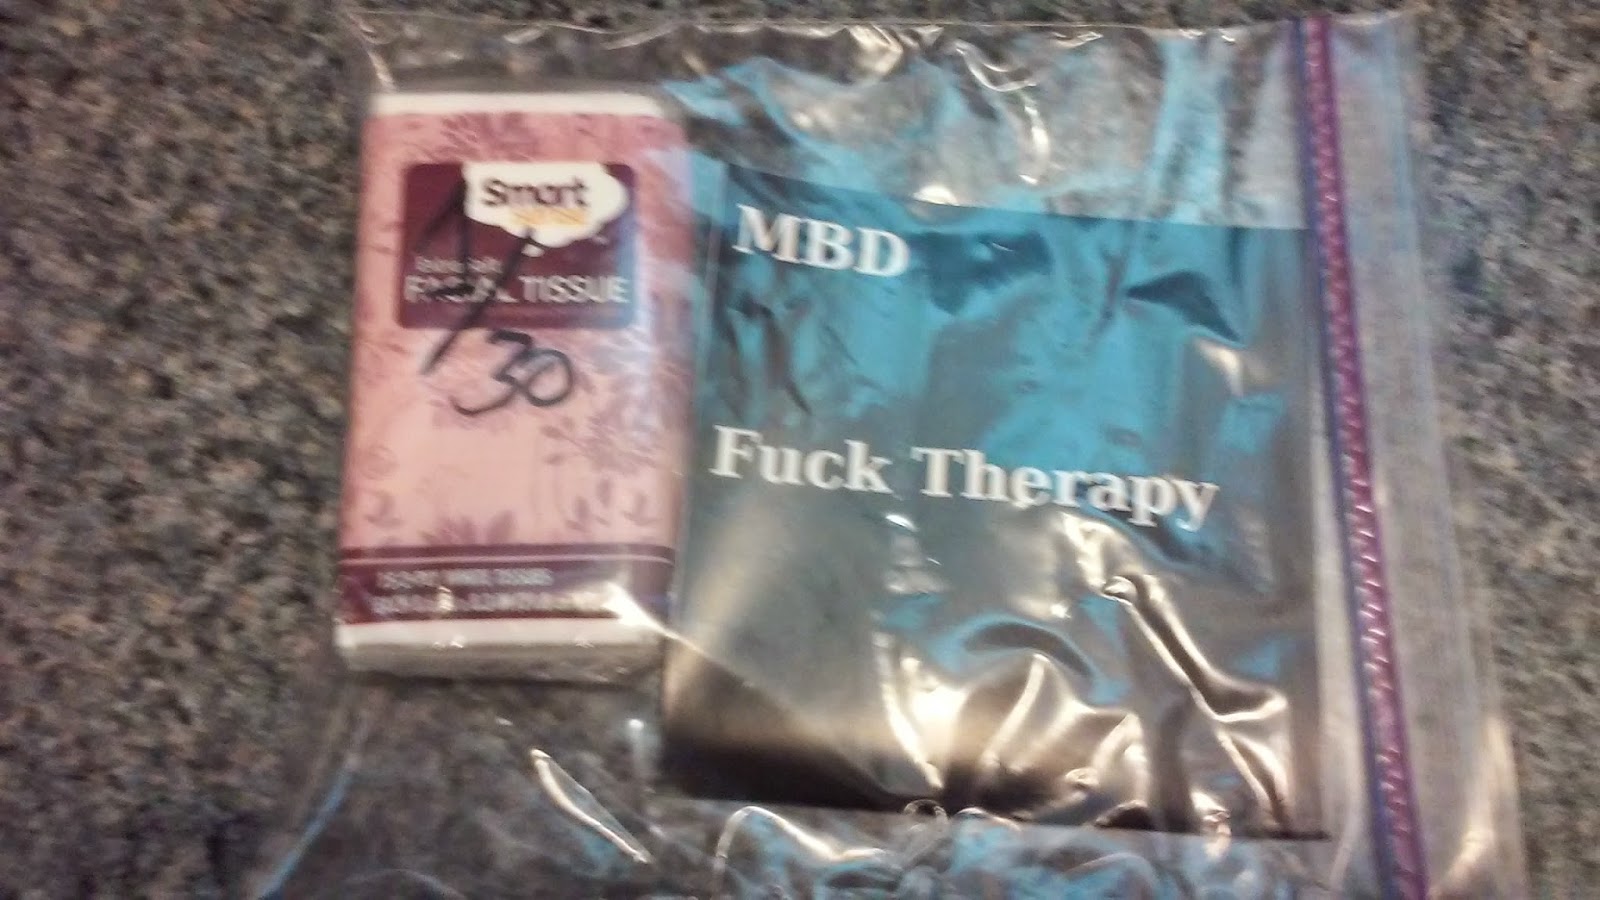 UTR 009: MBD - Fuck Therapy 3" CD-R MBD+Fuck+Therapy+Packaging